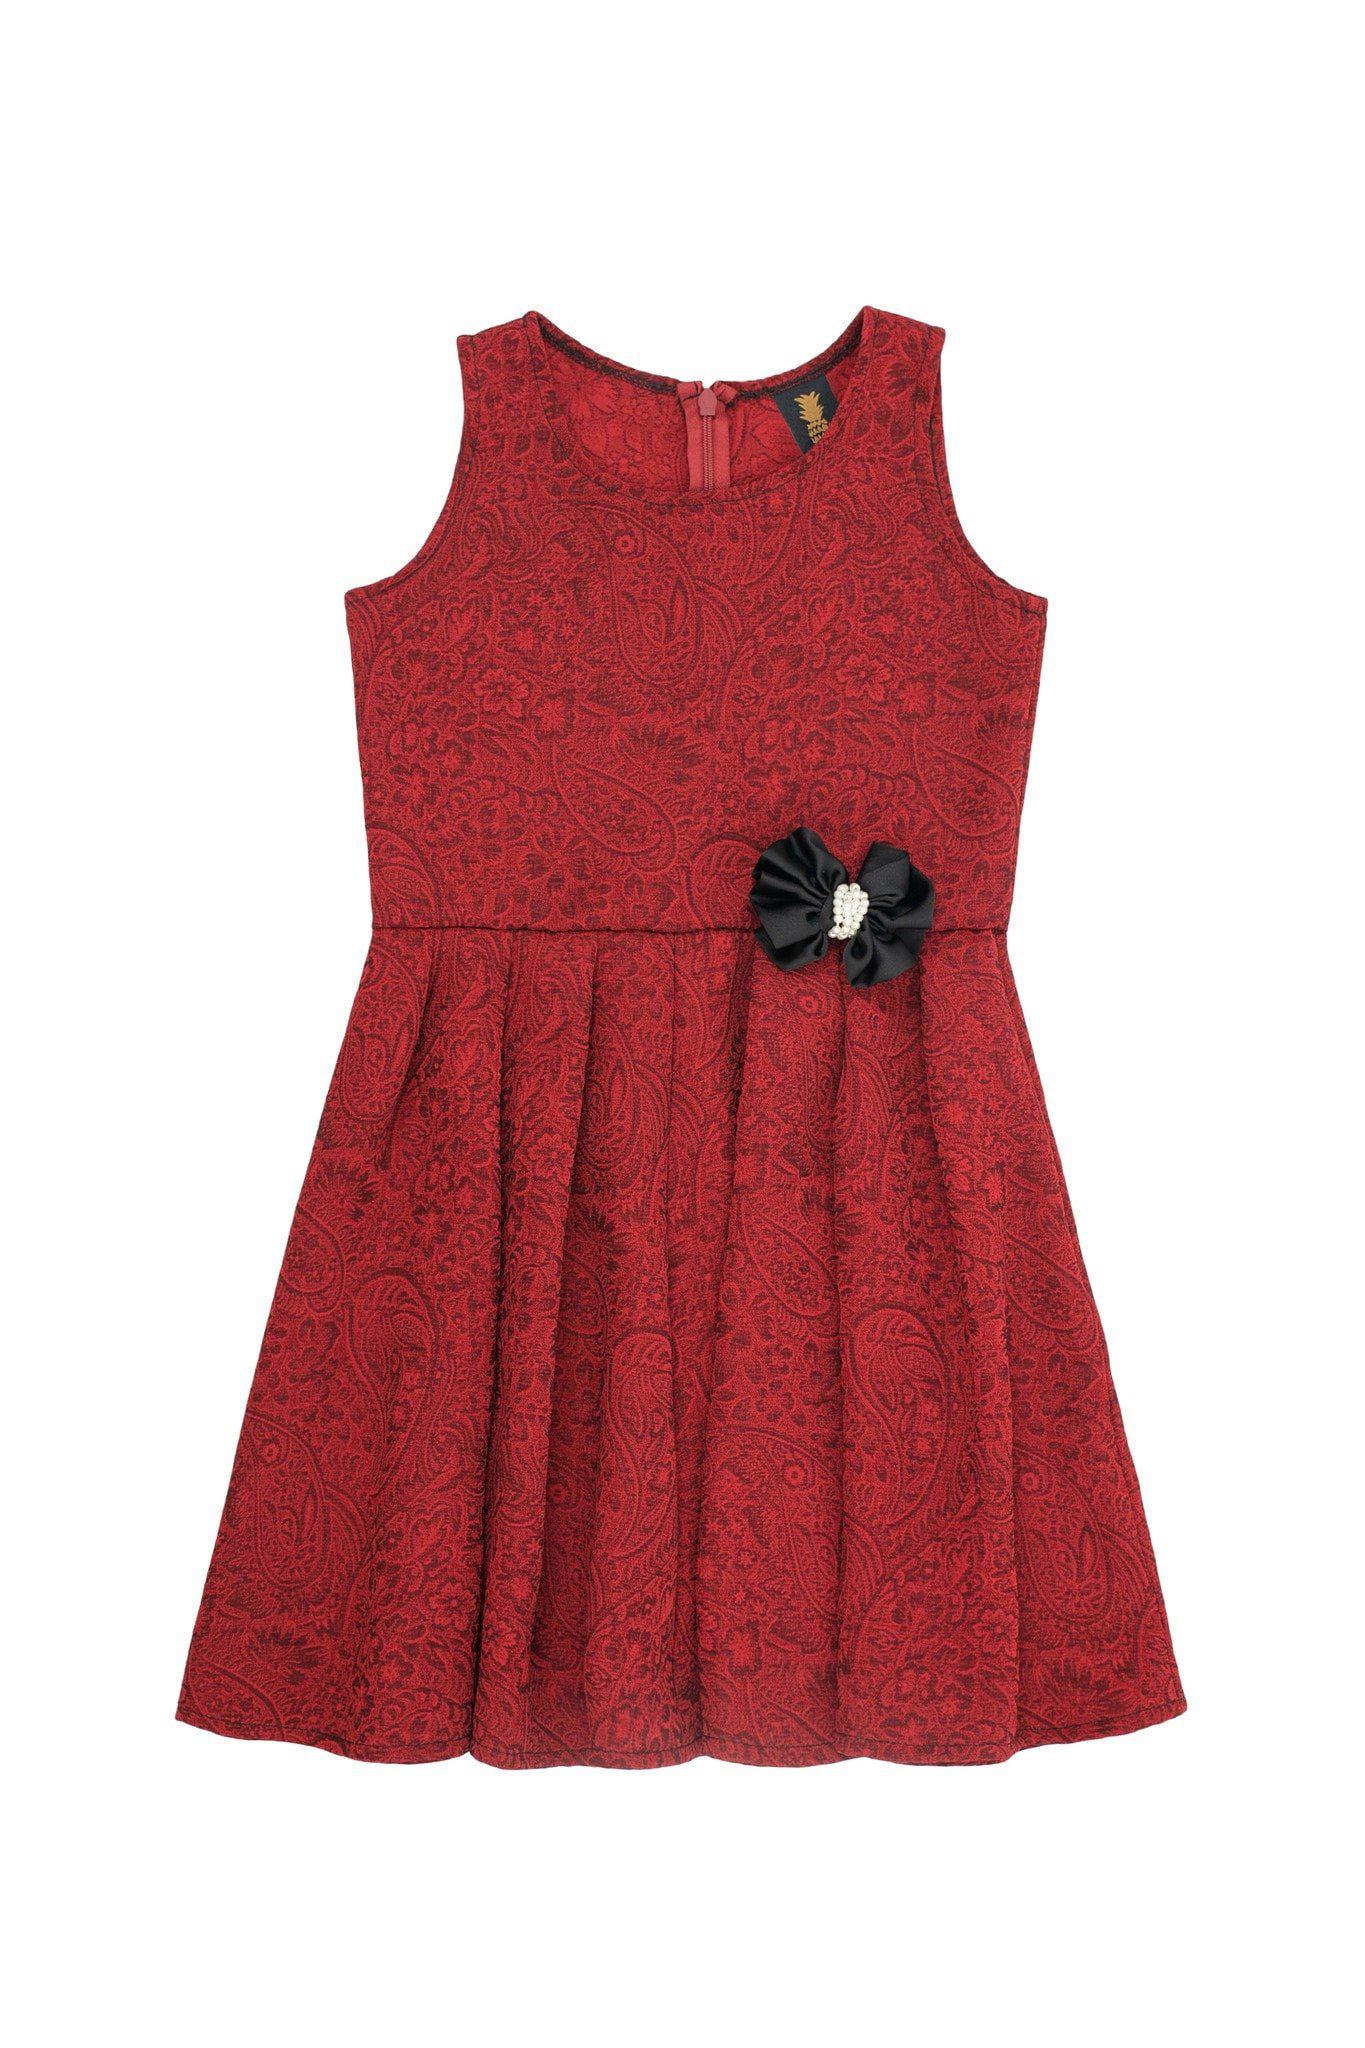 Ruby Red Floral Sleeveless Skater Cute Princess Party Dress - Girls - Pineapple Clothing